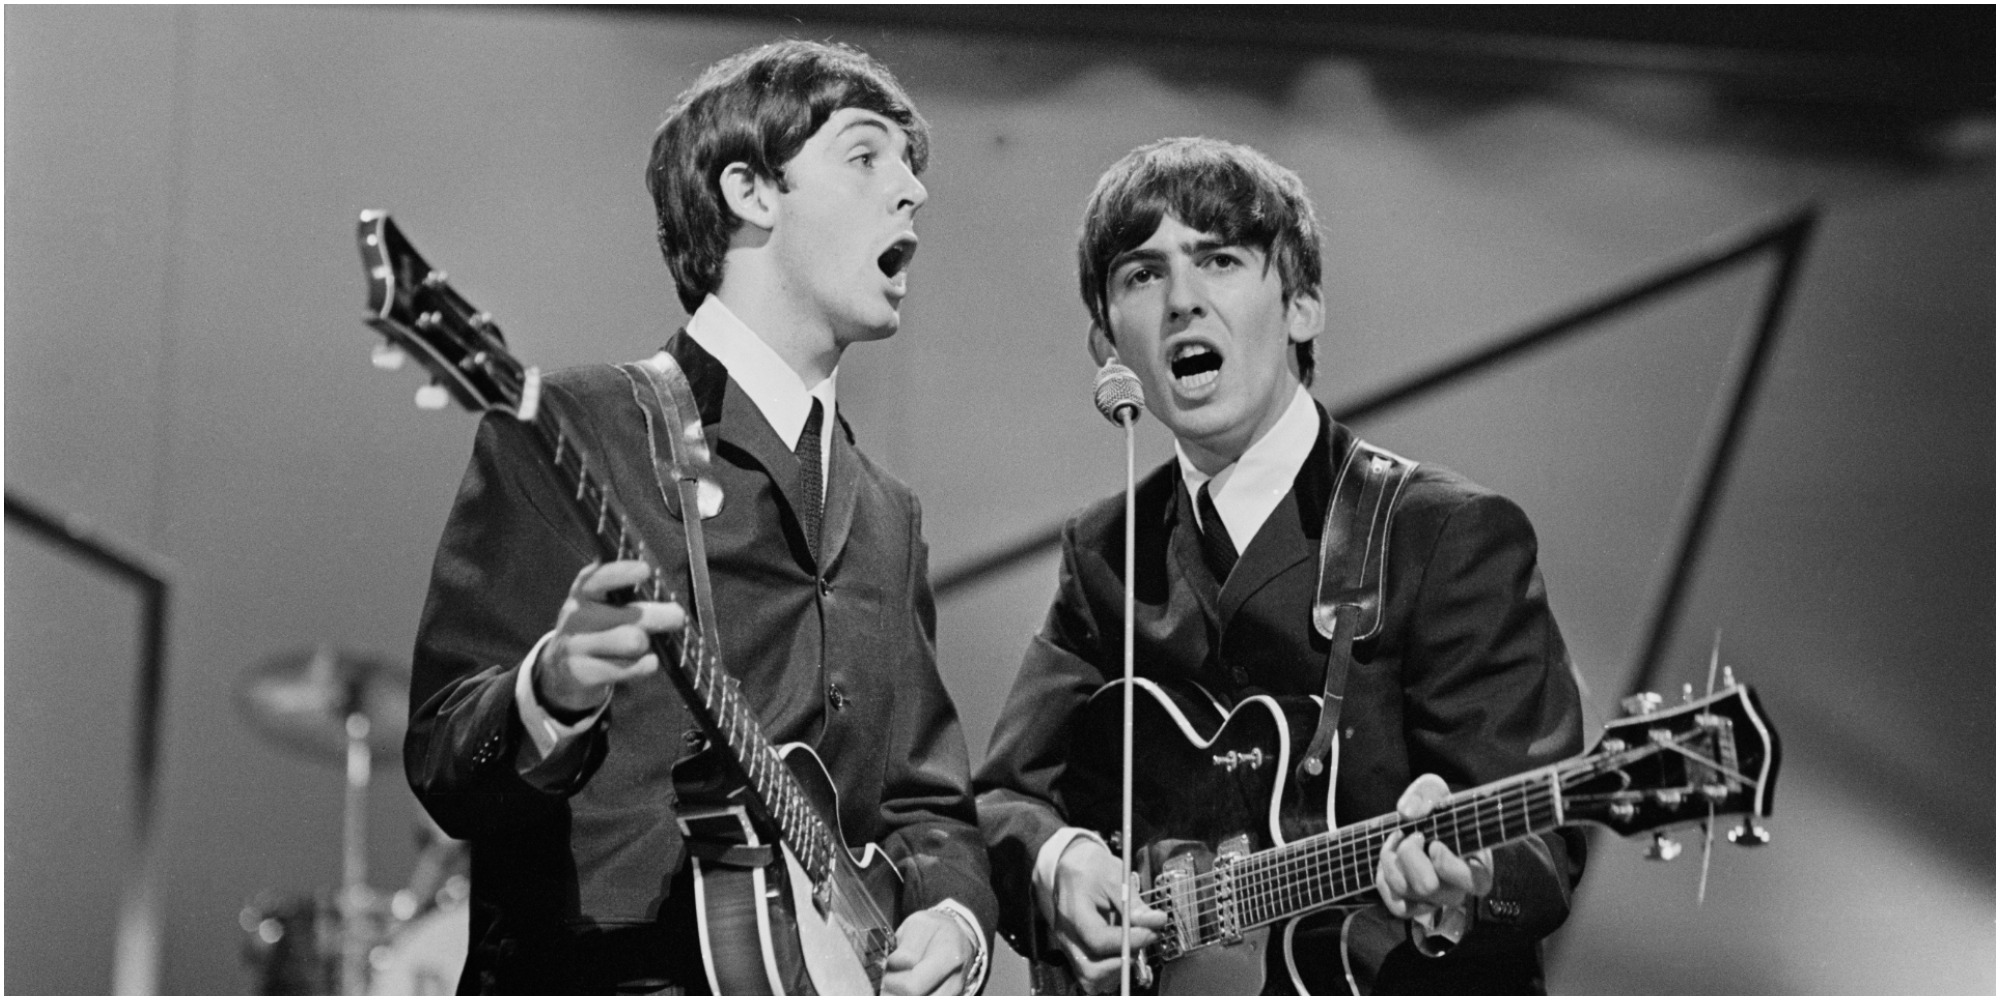 Paul McCartney and George Harrison perform on stage in 1963.